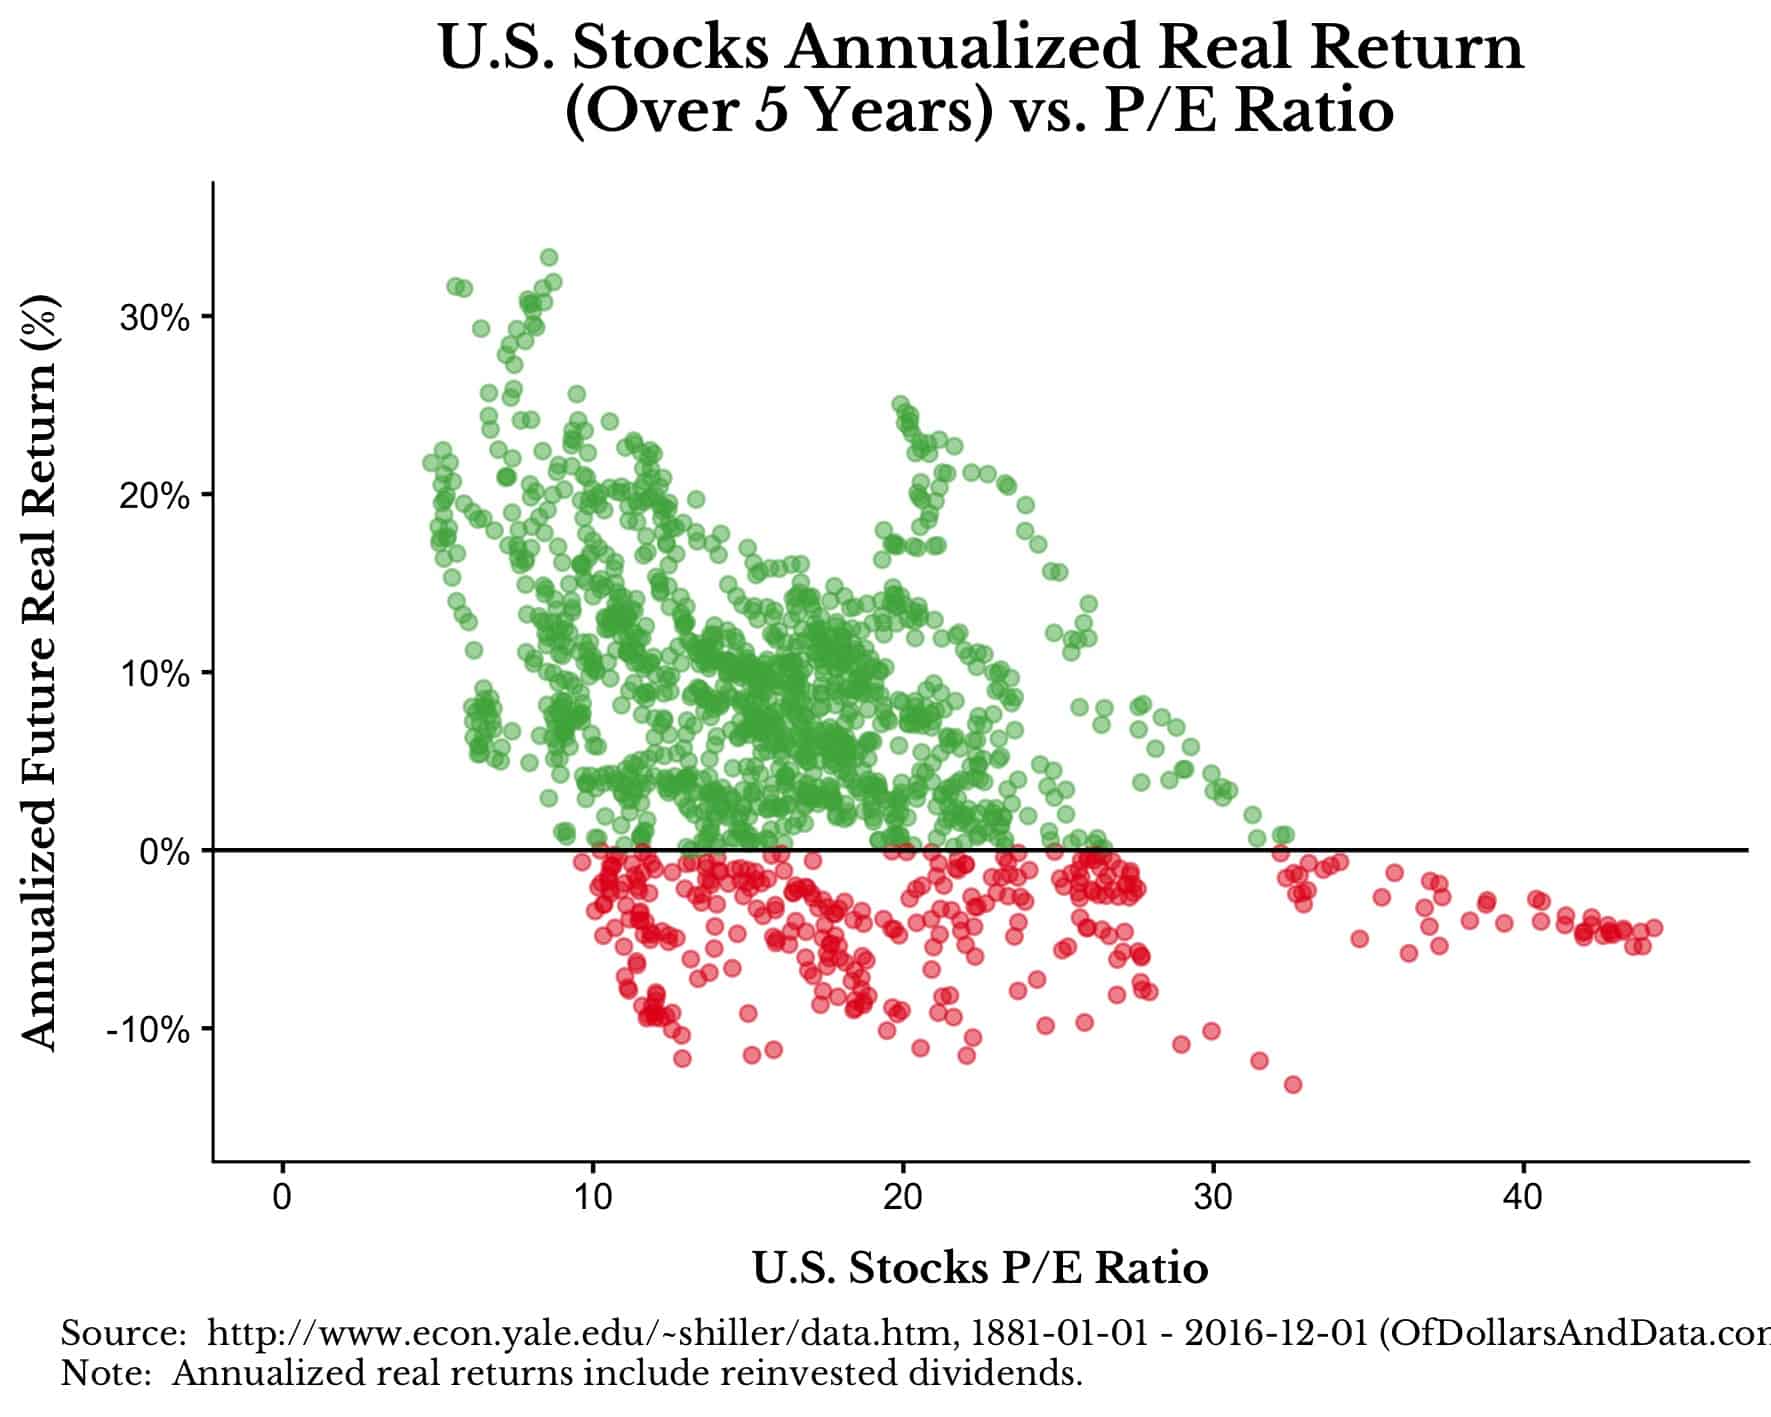 Annualize future real returns of US stocks over the next five years against US stock price-to-earnings ratio, where all positive returns are green and negative returns are red.